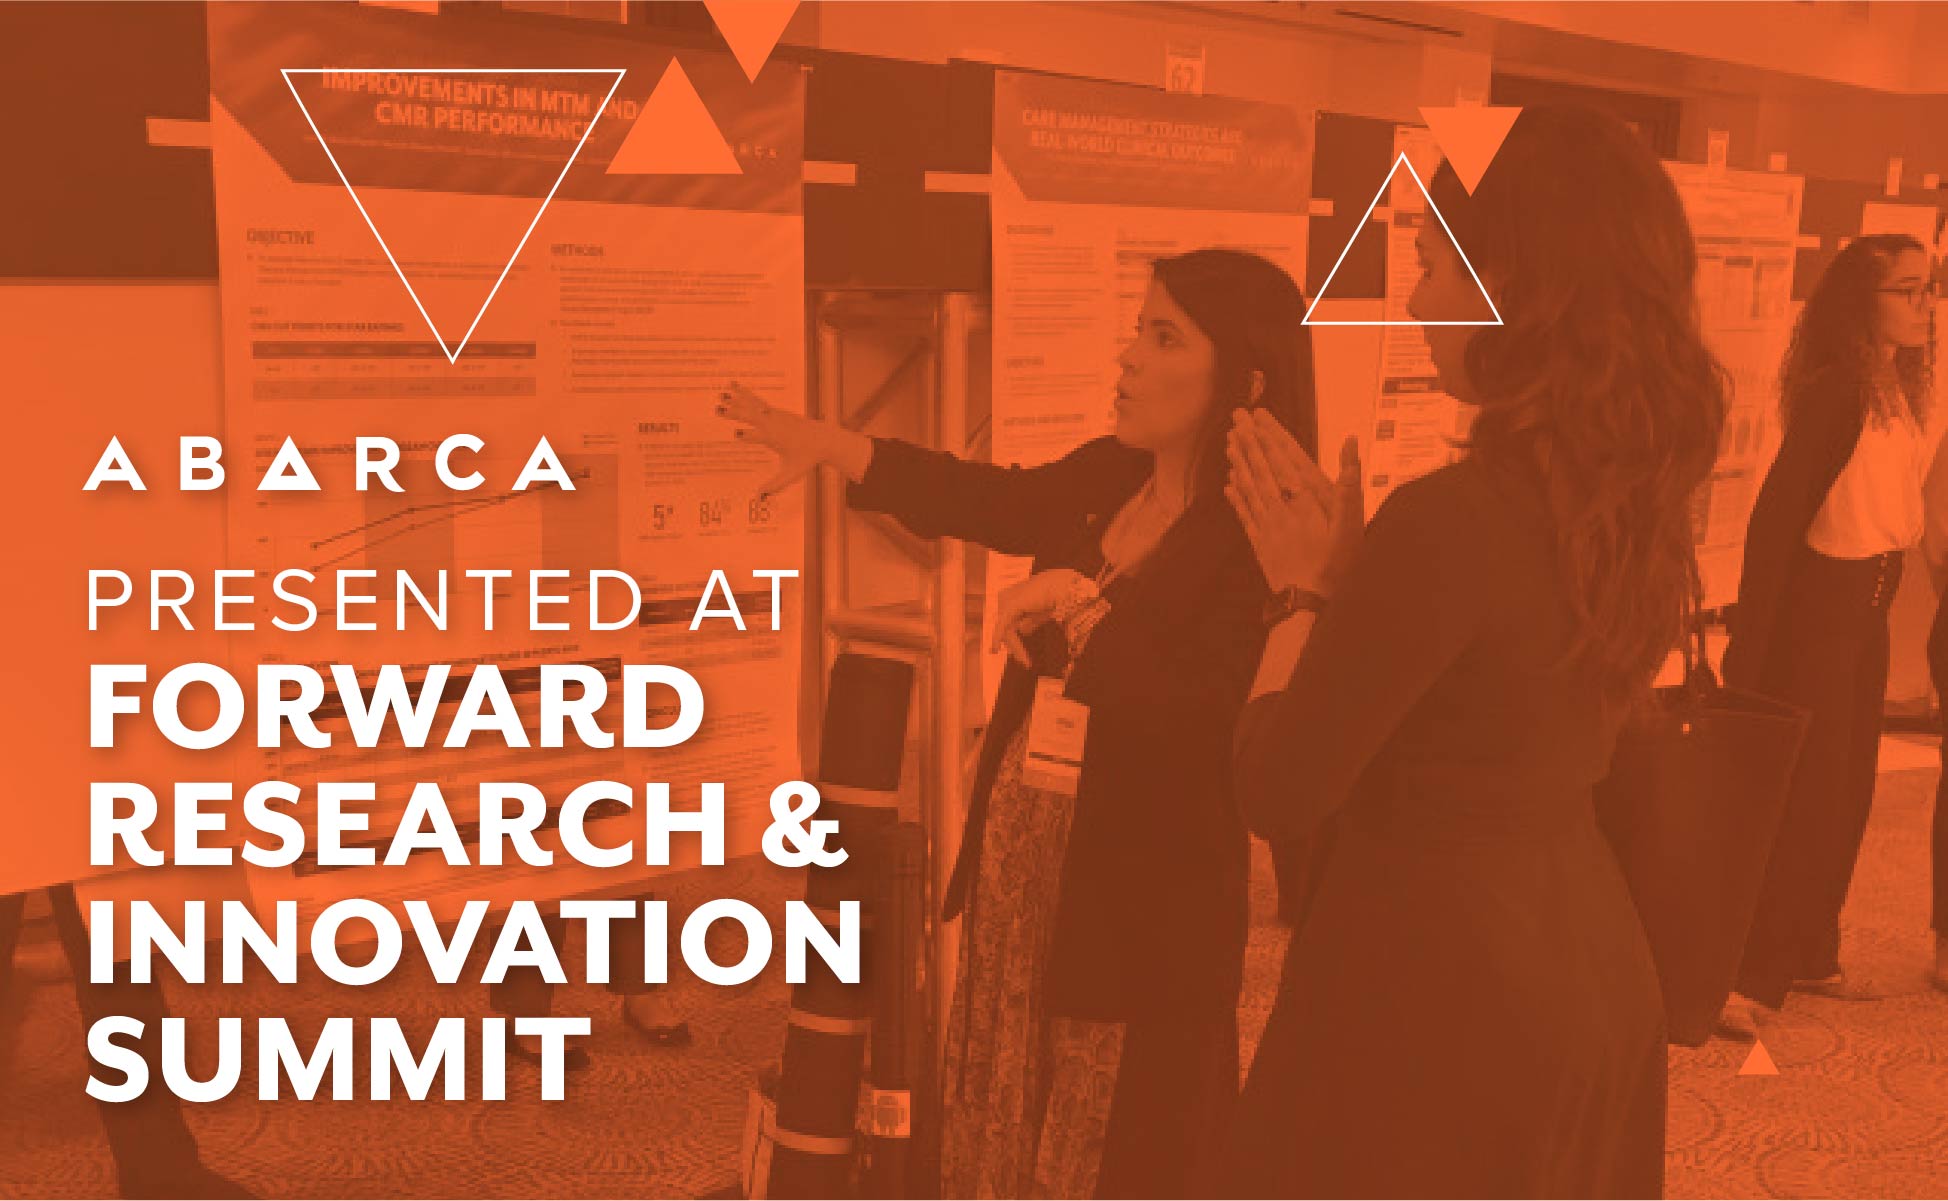 Abarca Health Presented at Forward Research & Innovation Summit